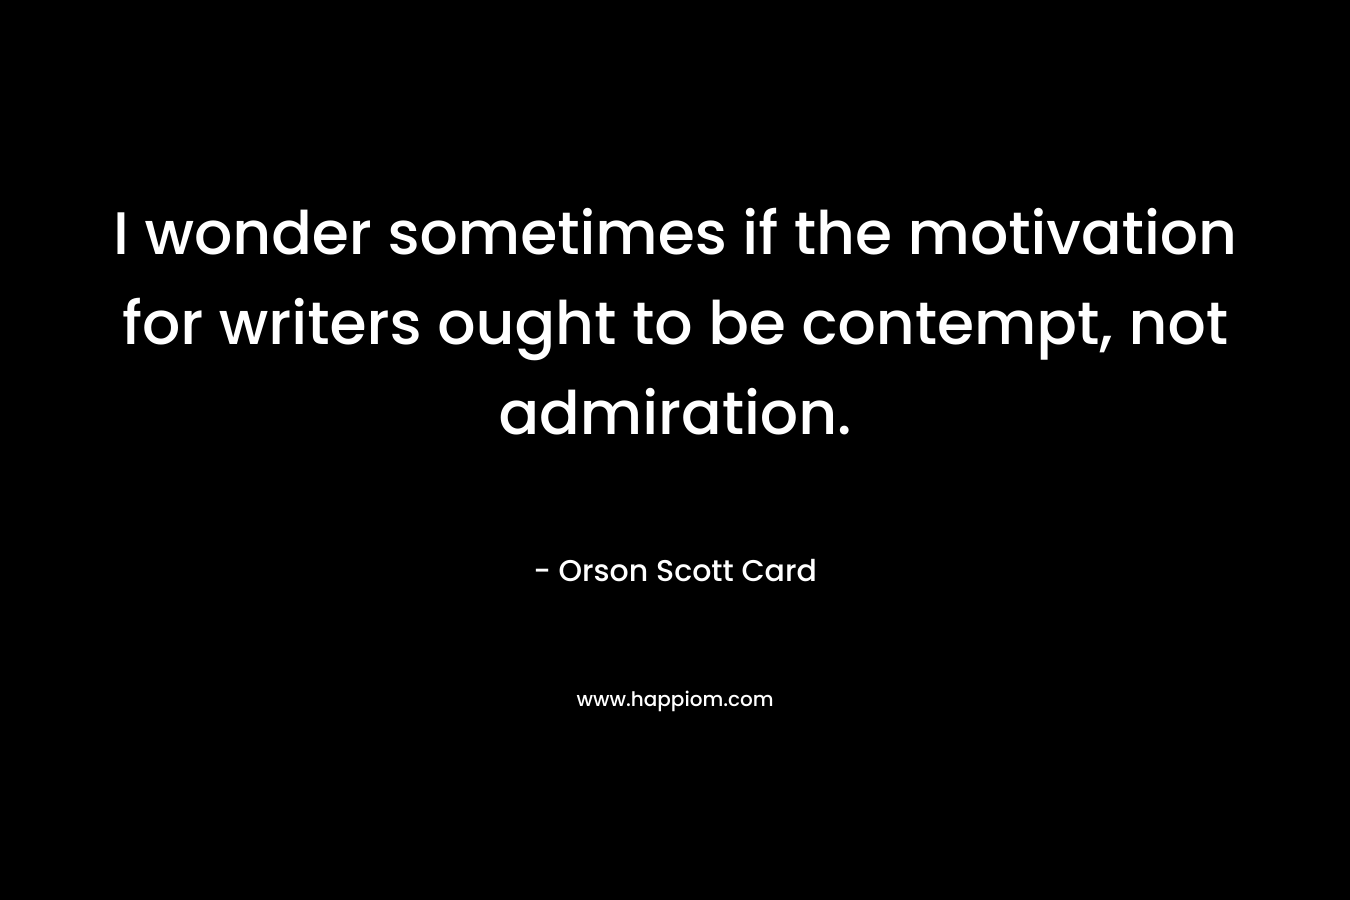 I wonder sometimes if the motivation for writers ought to be contempt, not admiration. – Orson Scott Card